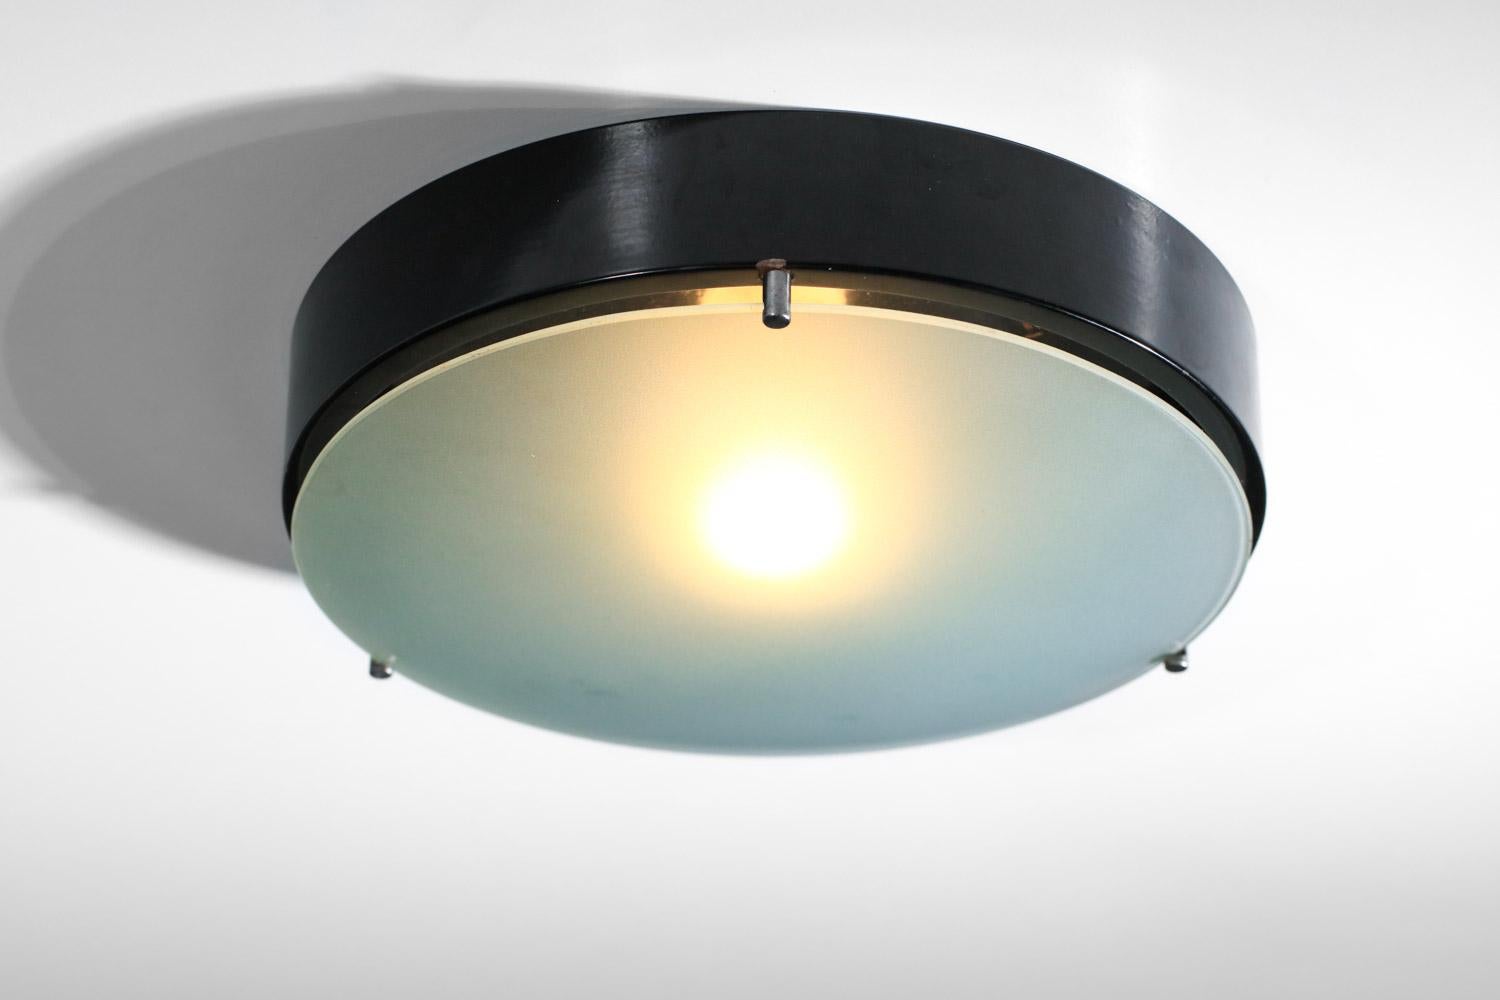 Pair of Italian ceiling lights from the 60s by Stilnovo. Round structure in black lacquered metal and large opaque glass lens. Can be used as wall lights (see photos). Beautiful vintage condition, with traces of oxidation on the metal parts. One E14